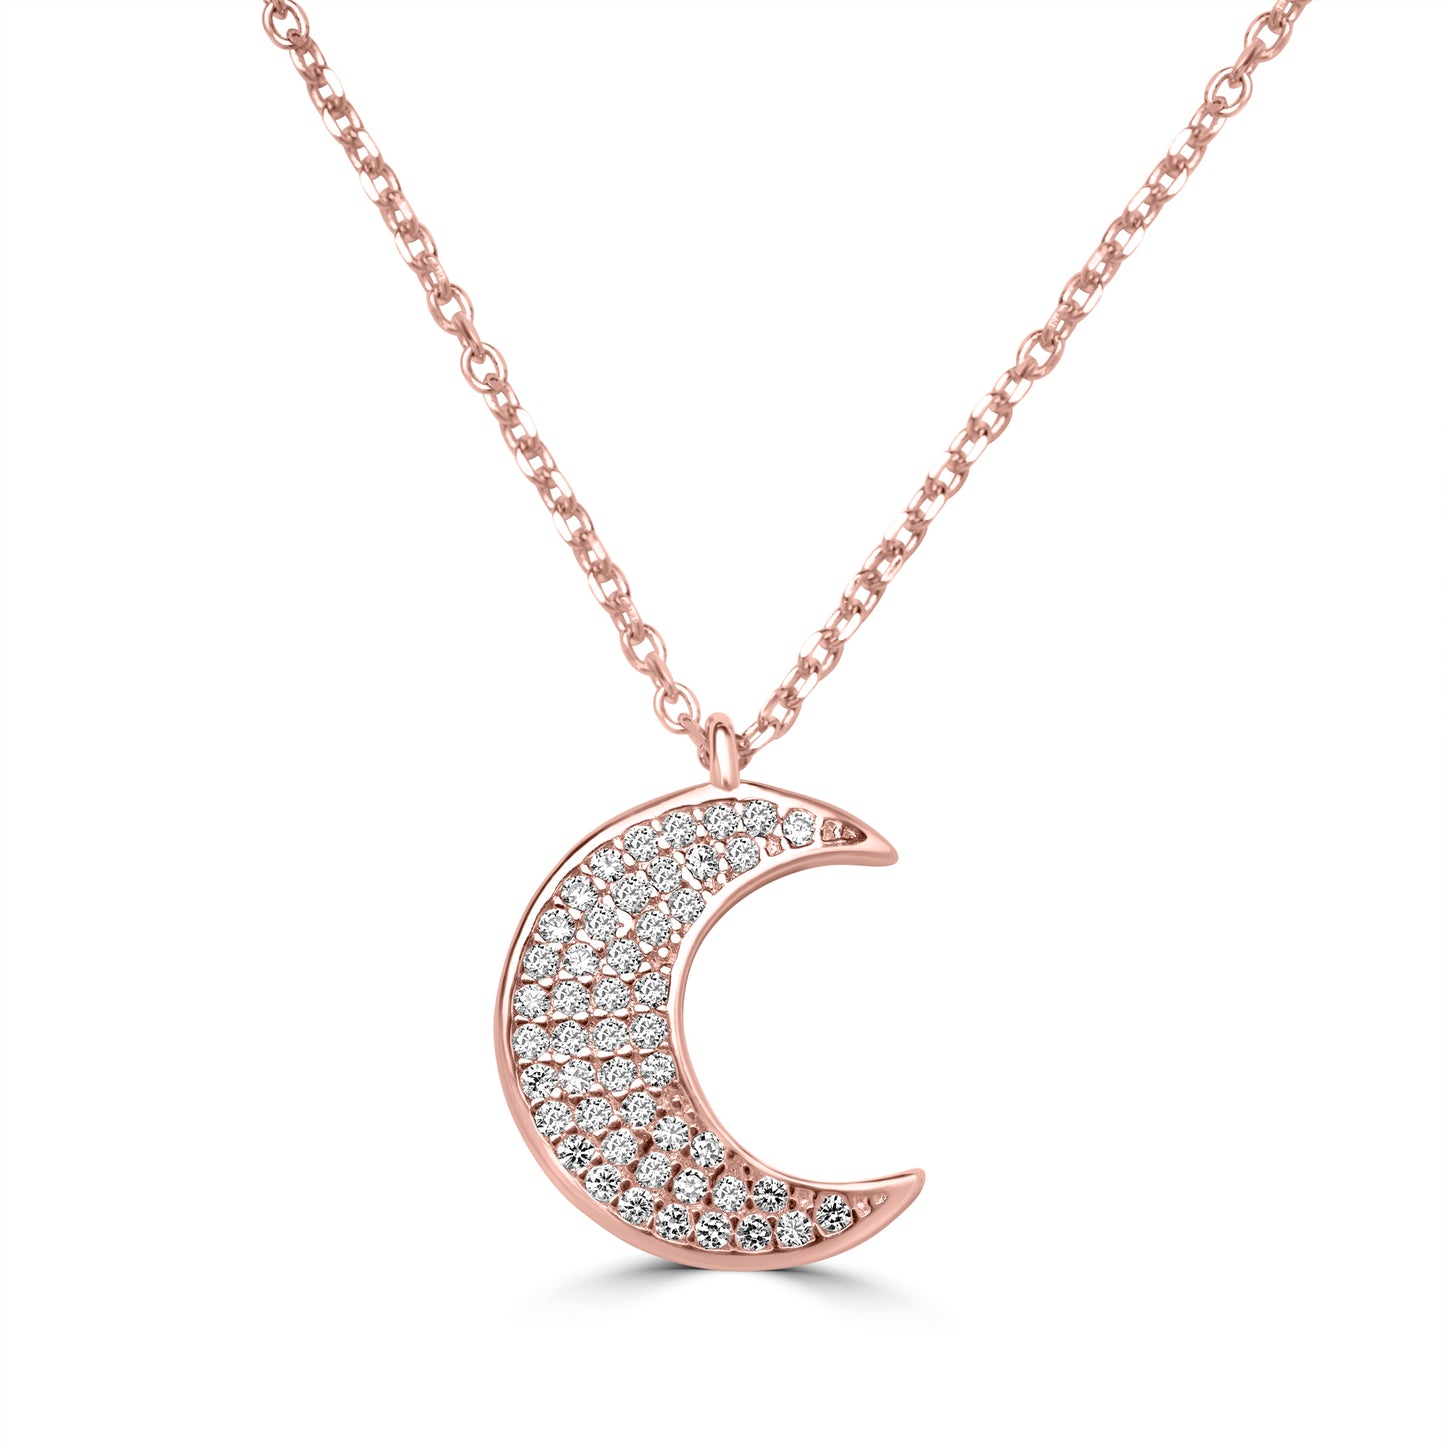 Rose Gold Moon Shaped Charms